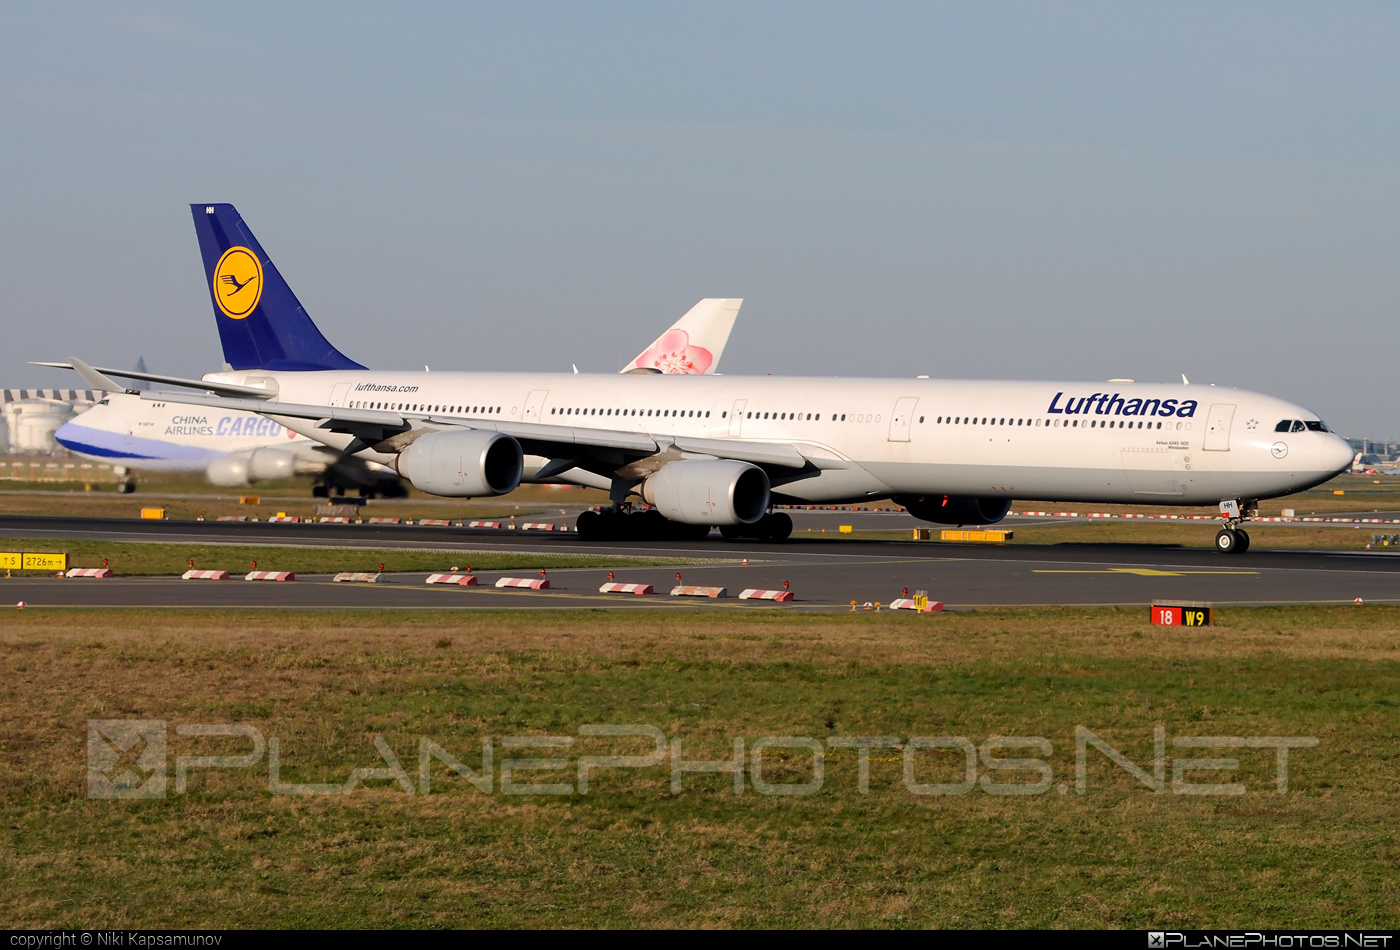 Airbus A340-642 - D-AIHH operated by Lufthansa #a340 #a340family #airbus #airbus340 #lufthansa